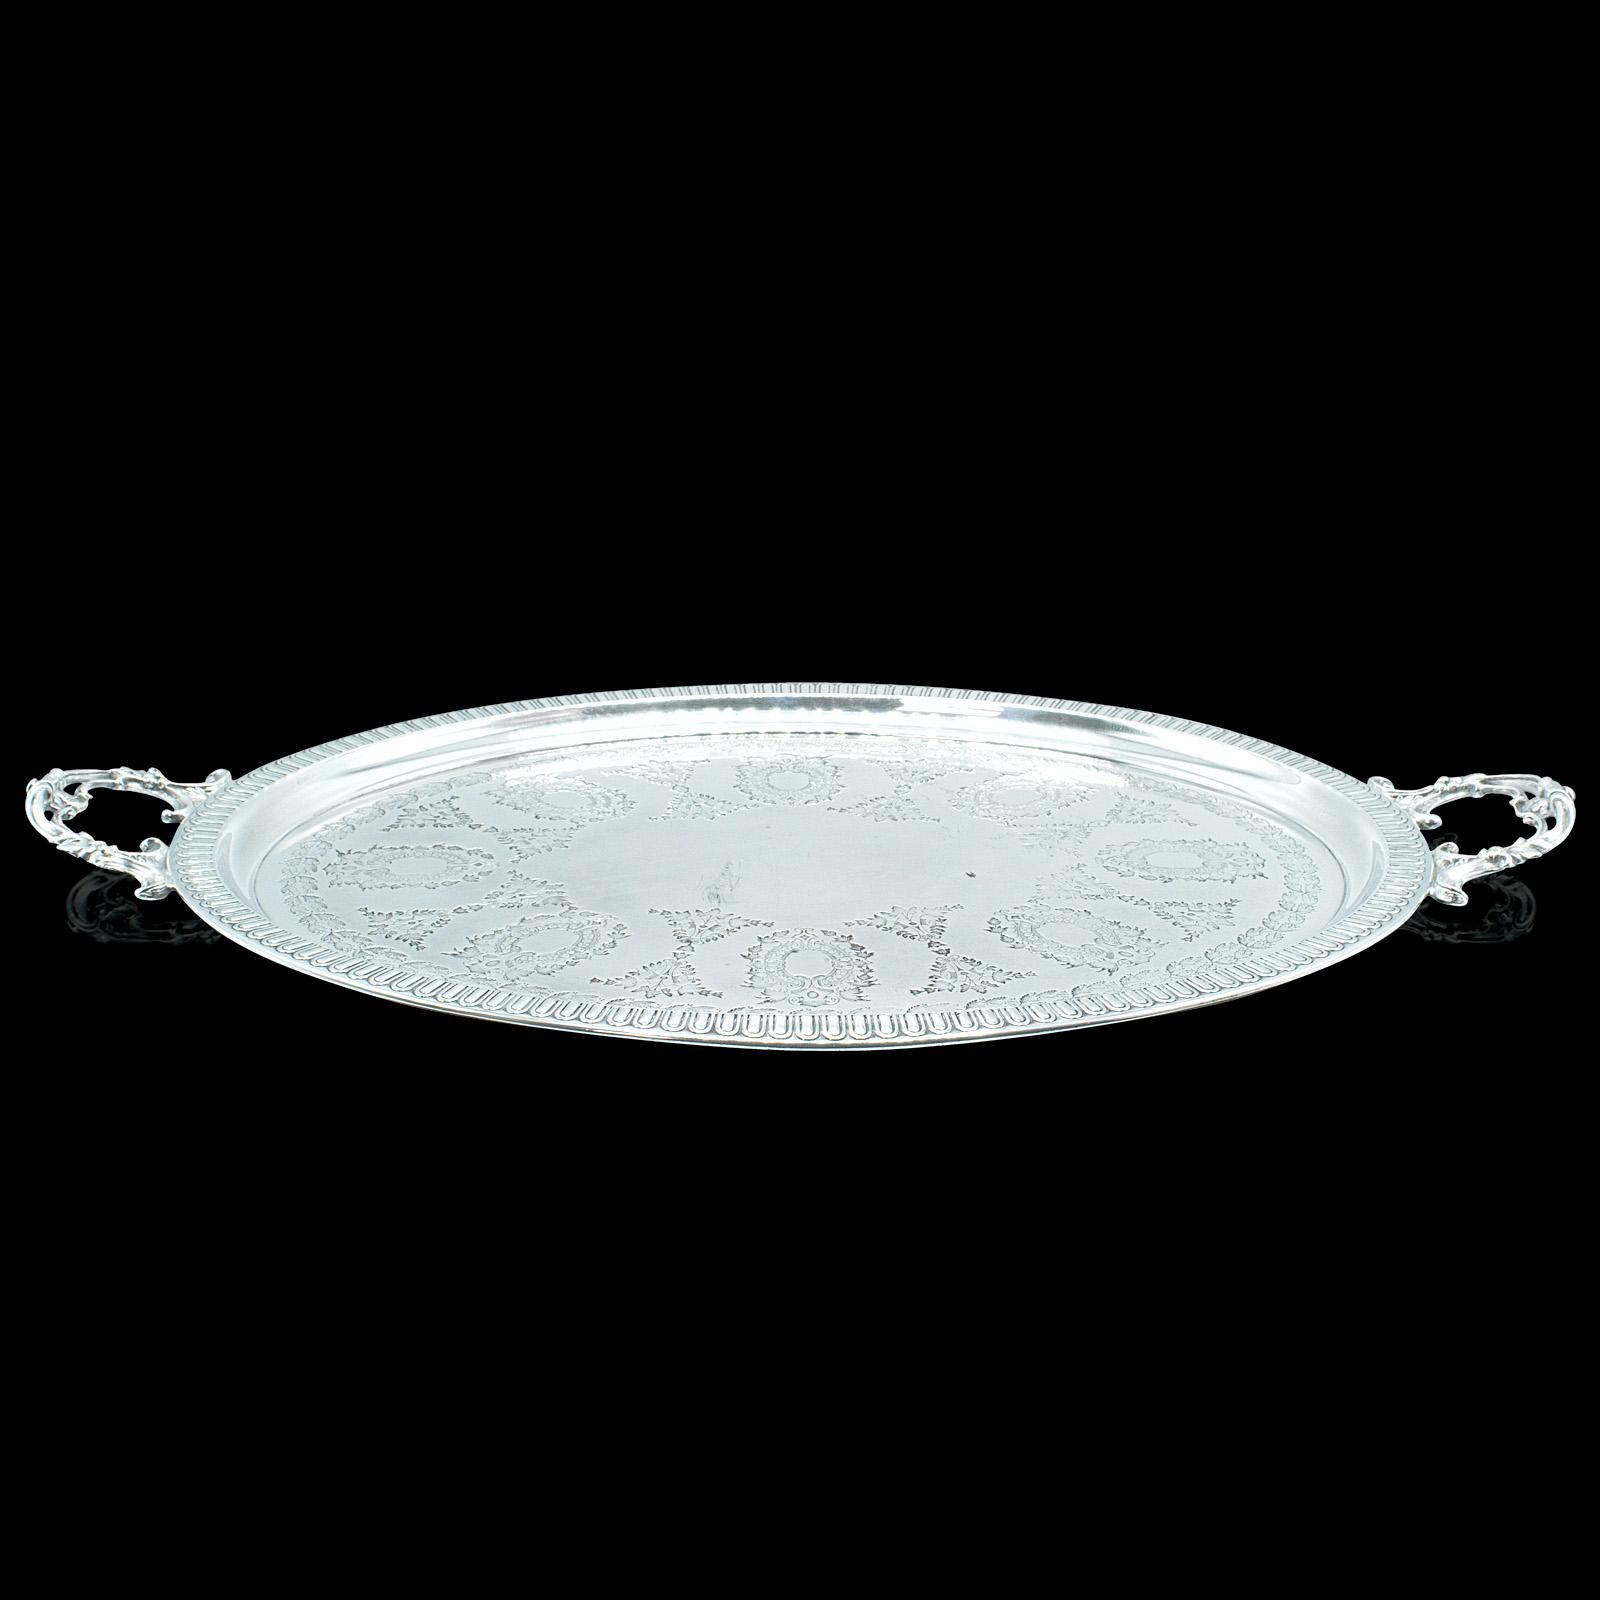 This is an antique oval decorative serving tray. An English, silver plate afternoon tea plater by Walker & Hall, dating to the Edwardian period, circa 1910.

Beaming with a reflective shine, a superb addition to the tea service
Displays a